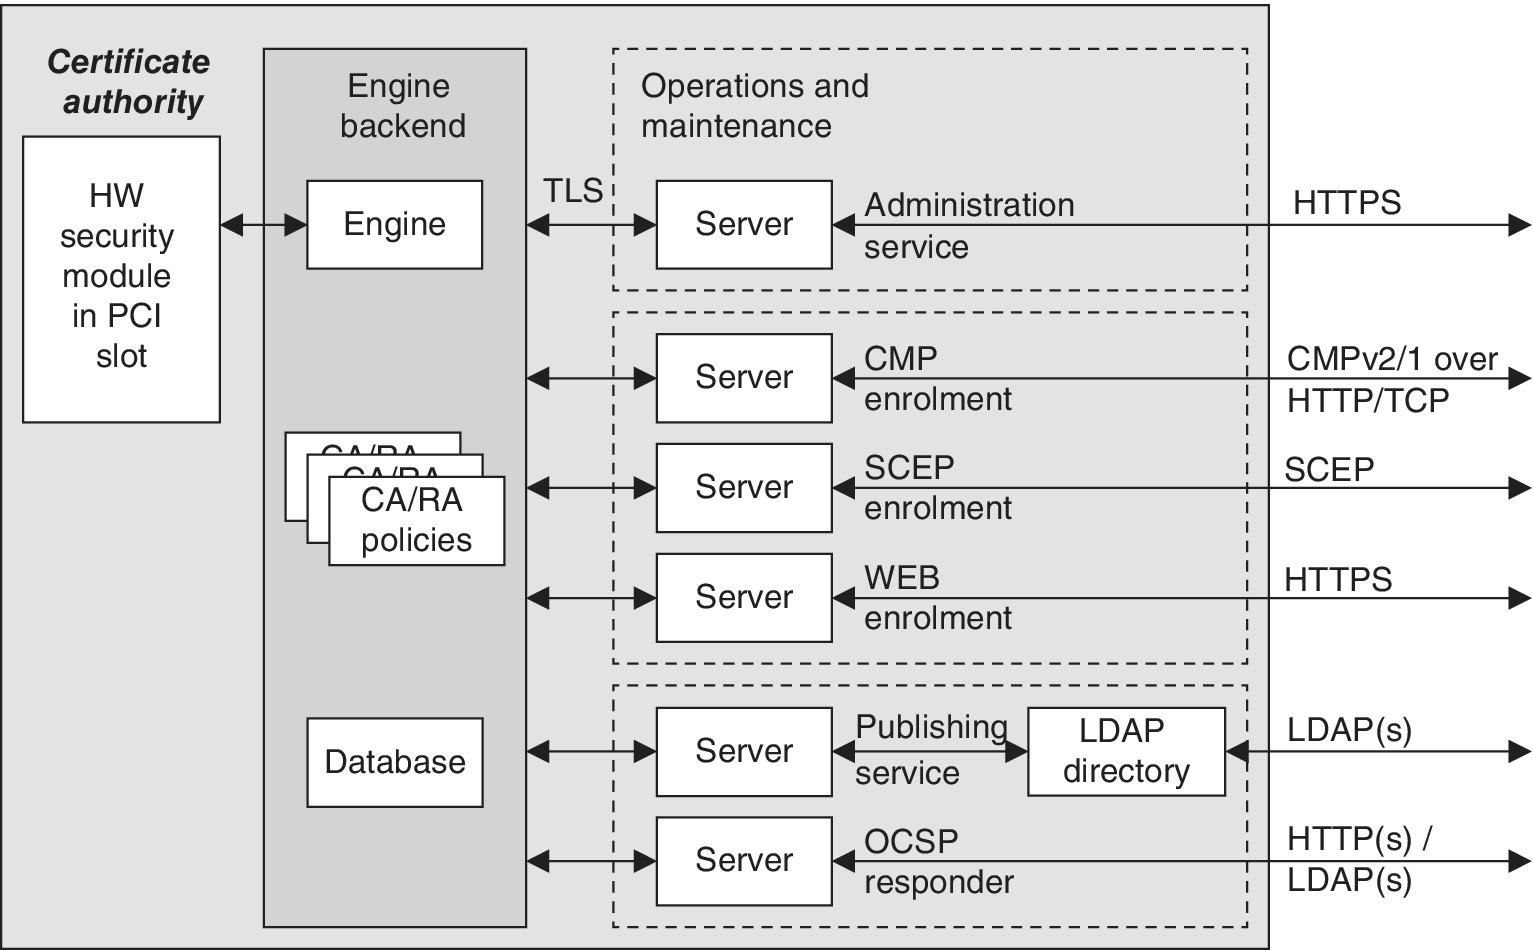 Schematic of the PKI design with the architecture and interfaces depicting certificate authority containing engine backend and operations and maintenance.